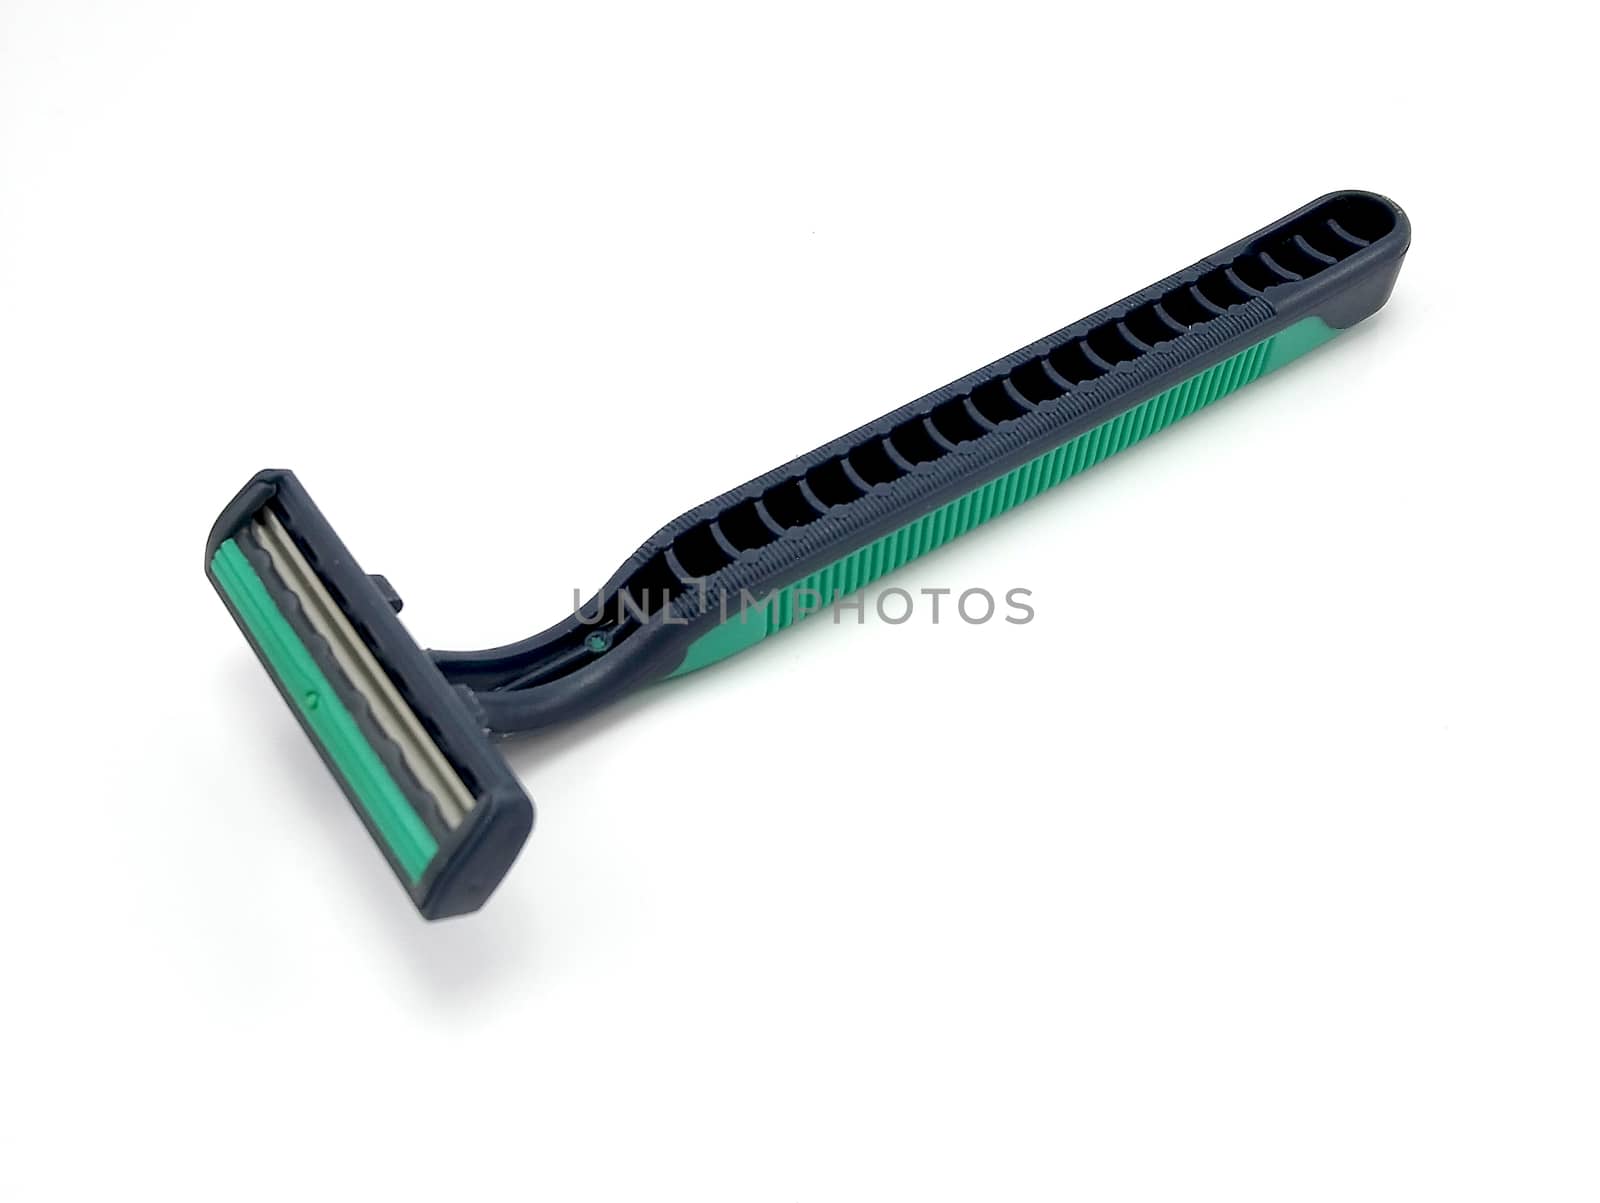 Disposable plastic green and black body manual shaver  by imwaltersy